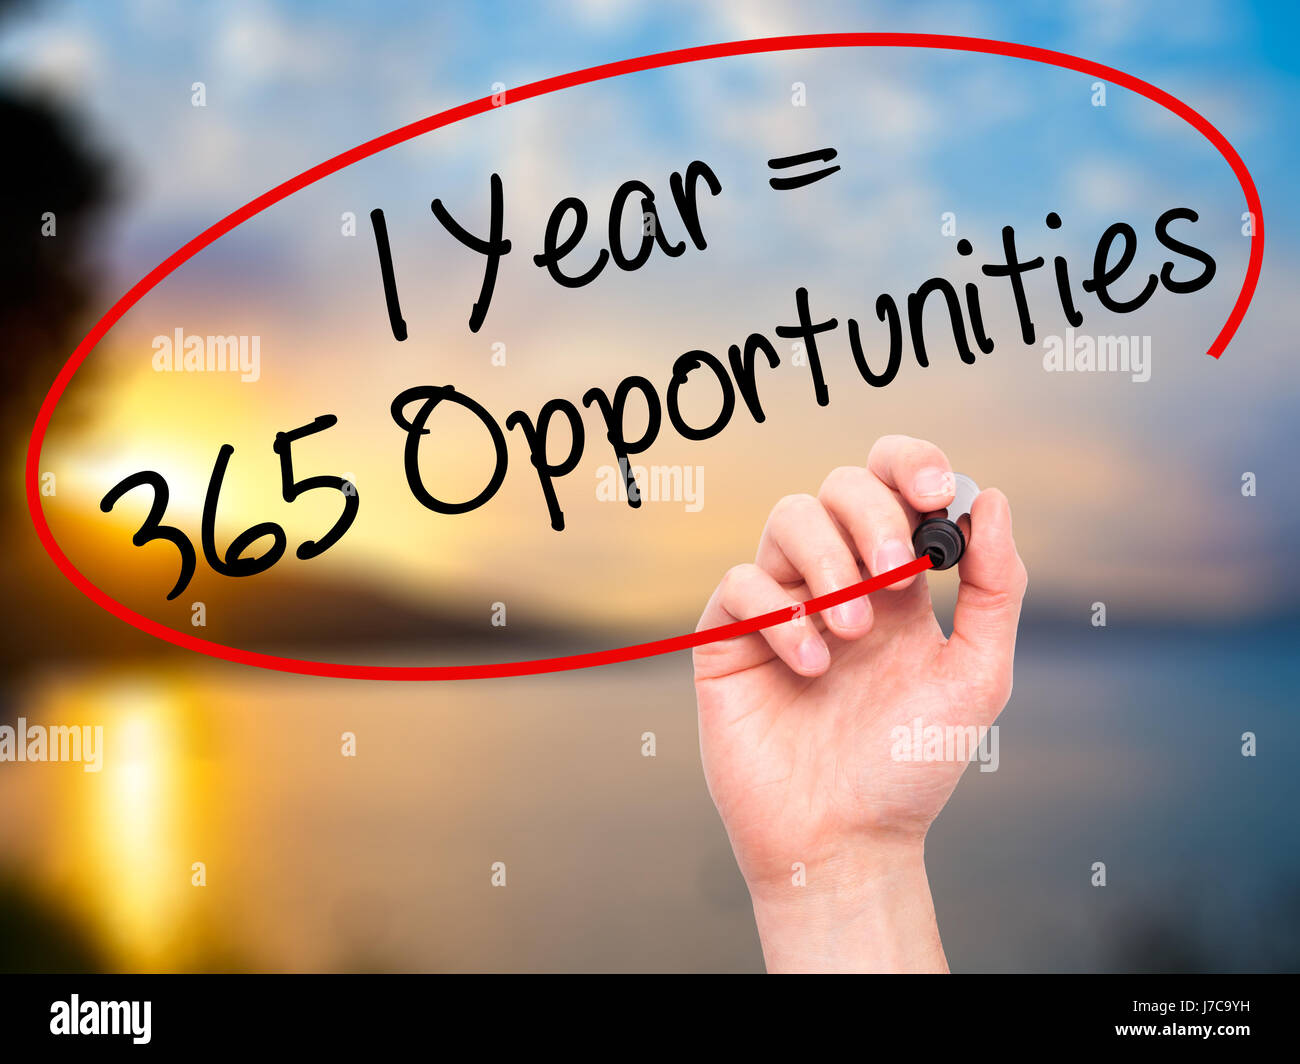 Man Hand Writing 1 Year 365 Opportunities With Black Marker On Visual Screen Isolated On Background Business Technology Internet Concept Stock Stock Photo Alamy